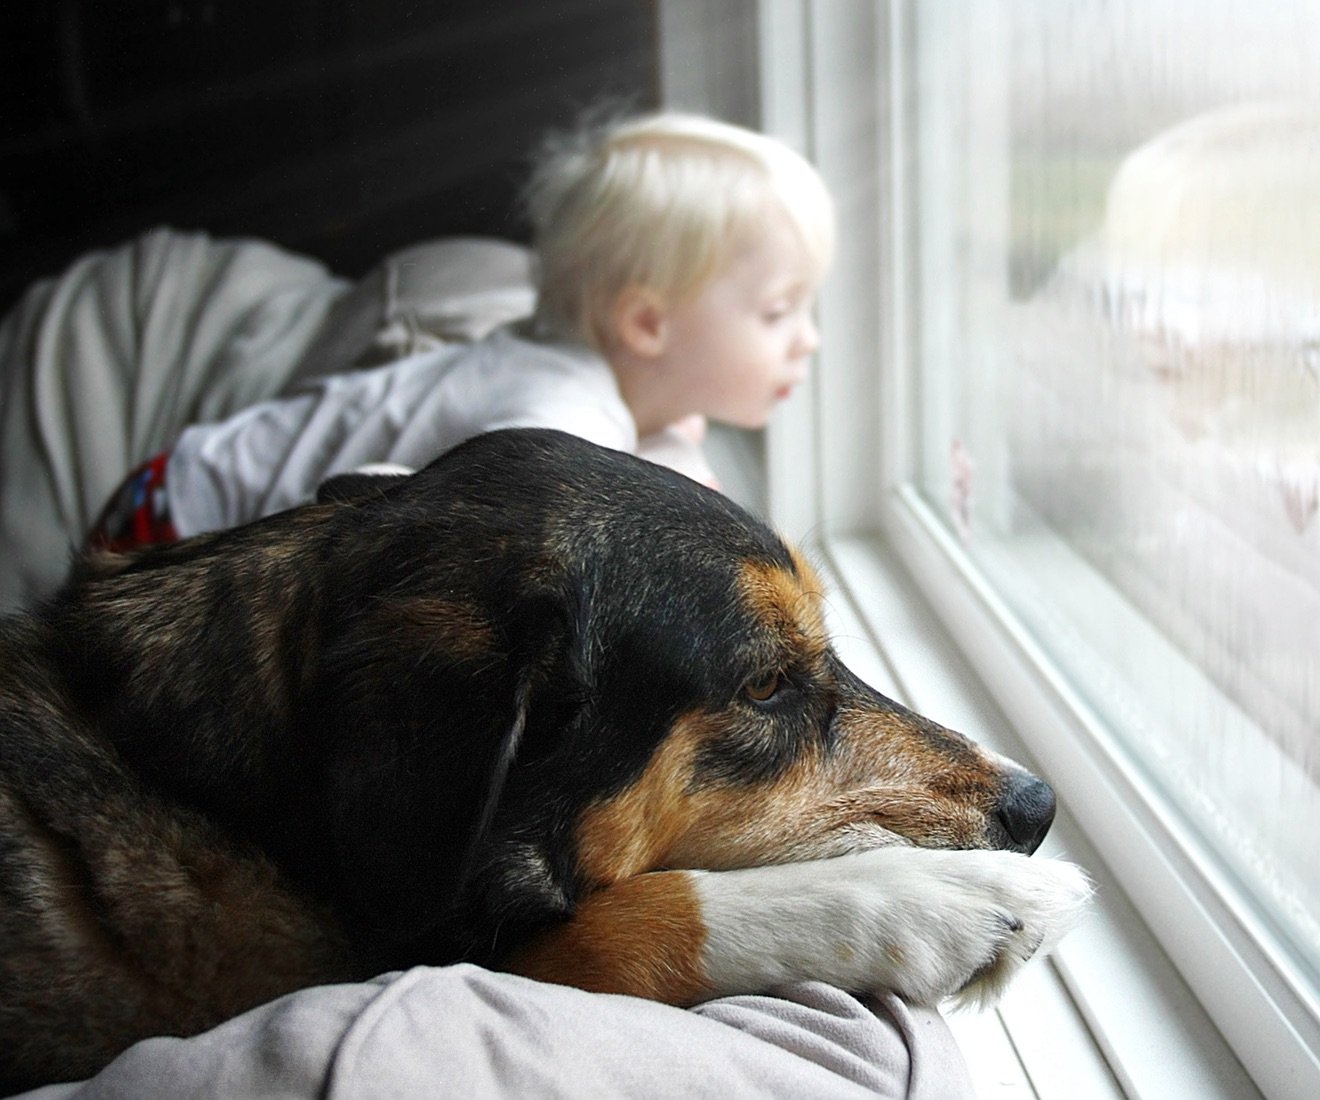 Toddler and dog looking out a window.